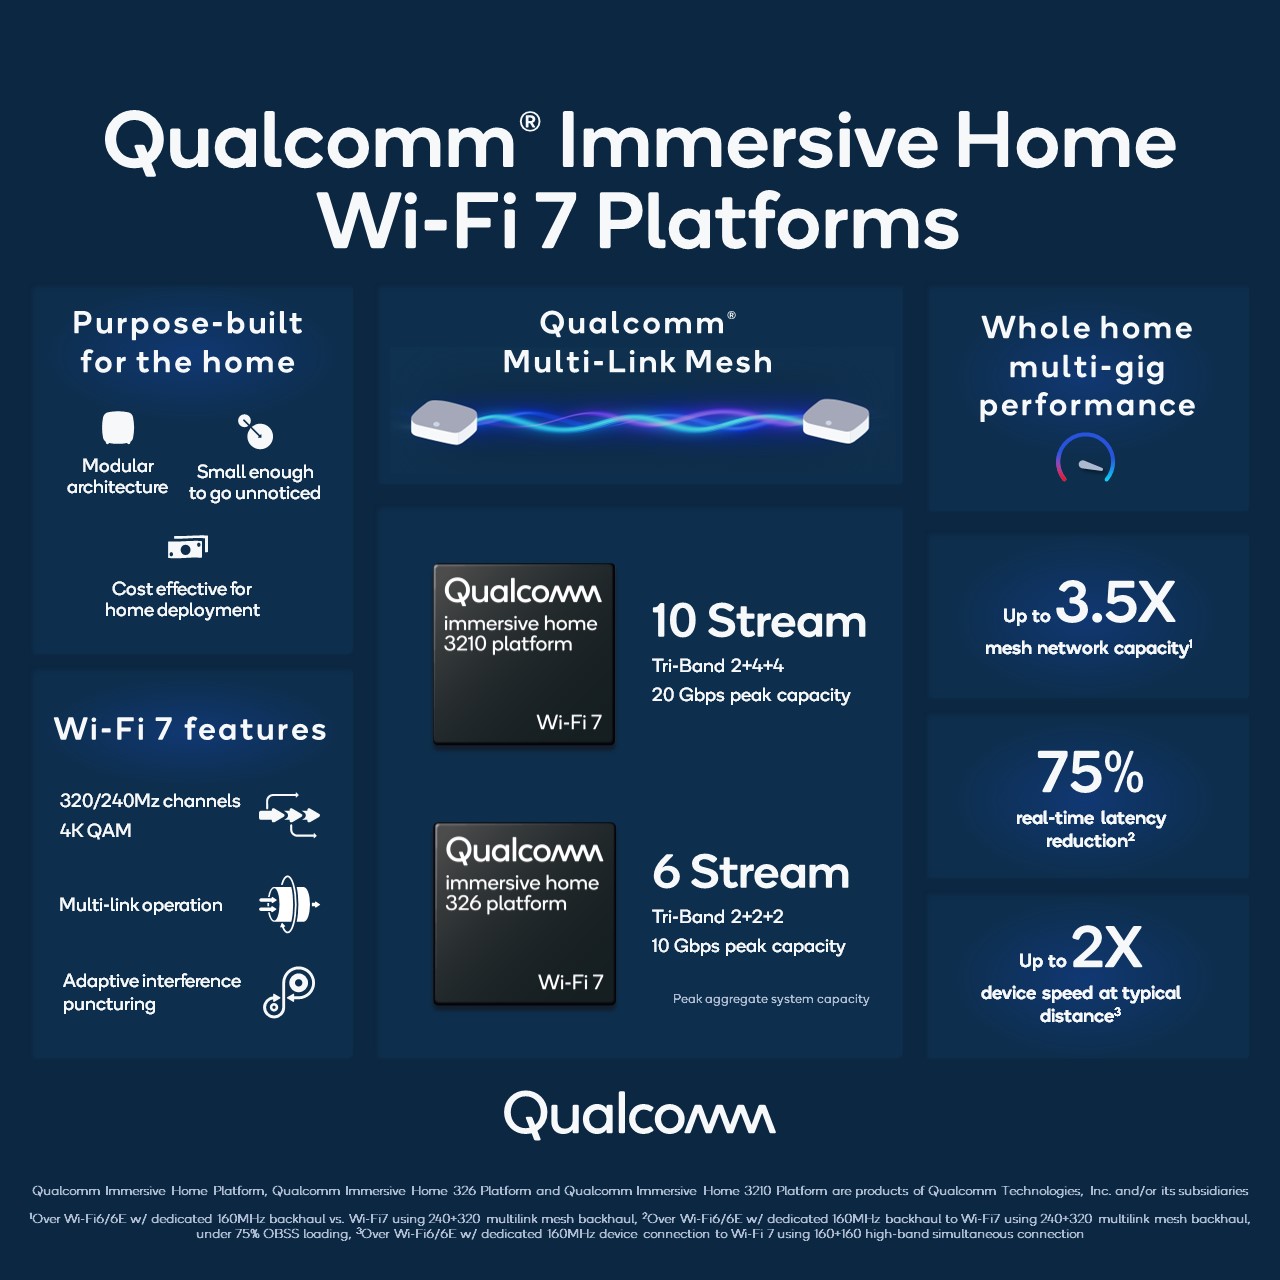 New Qualcomm Immersive Home Platforms set to revolutionize home networking with Wi-Fi 7 Qualcomm